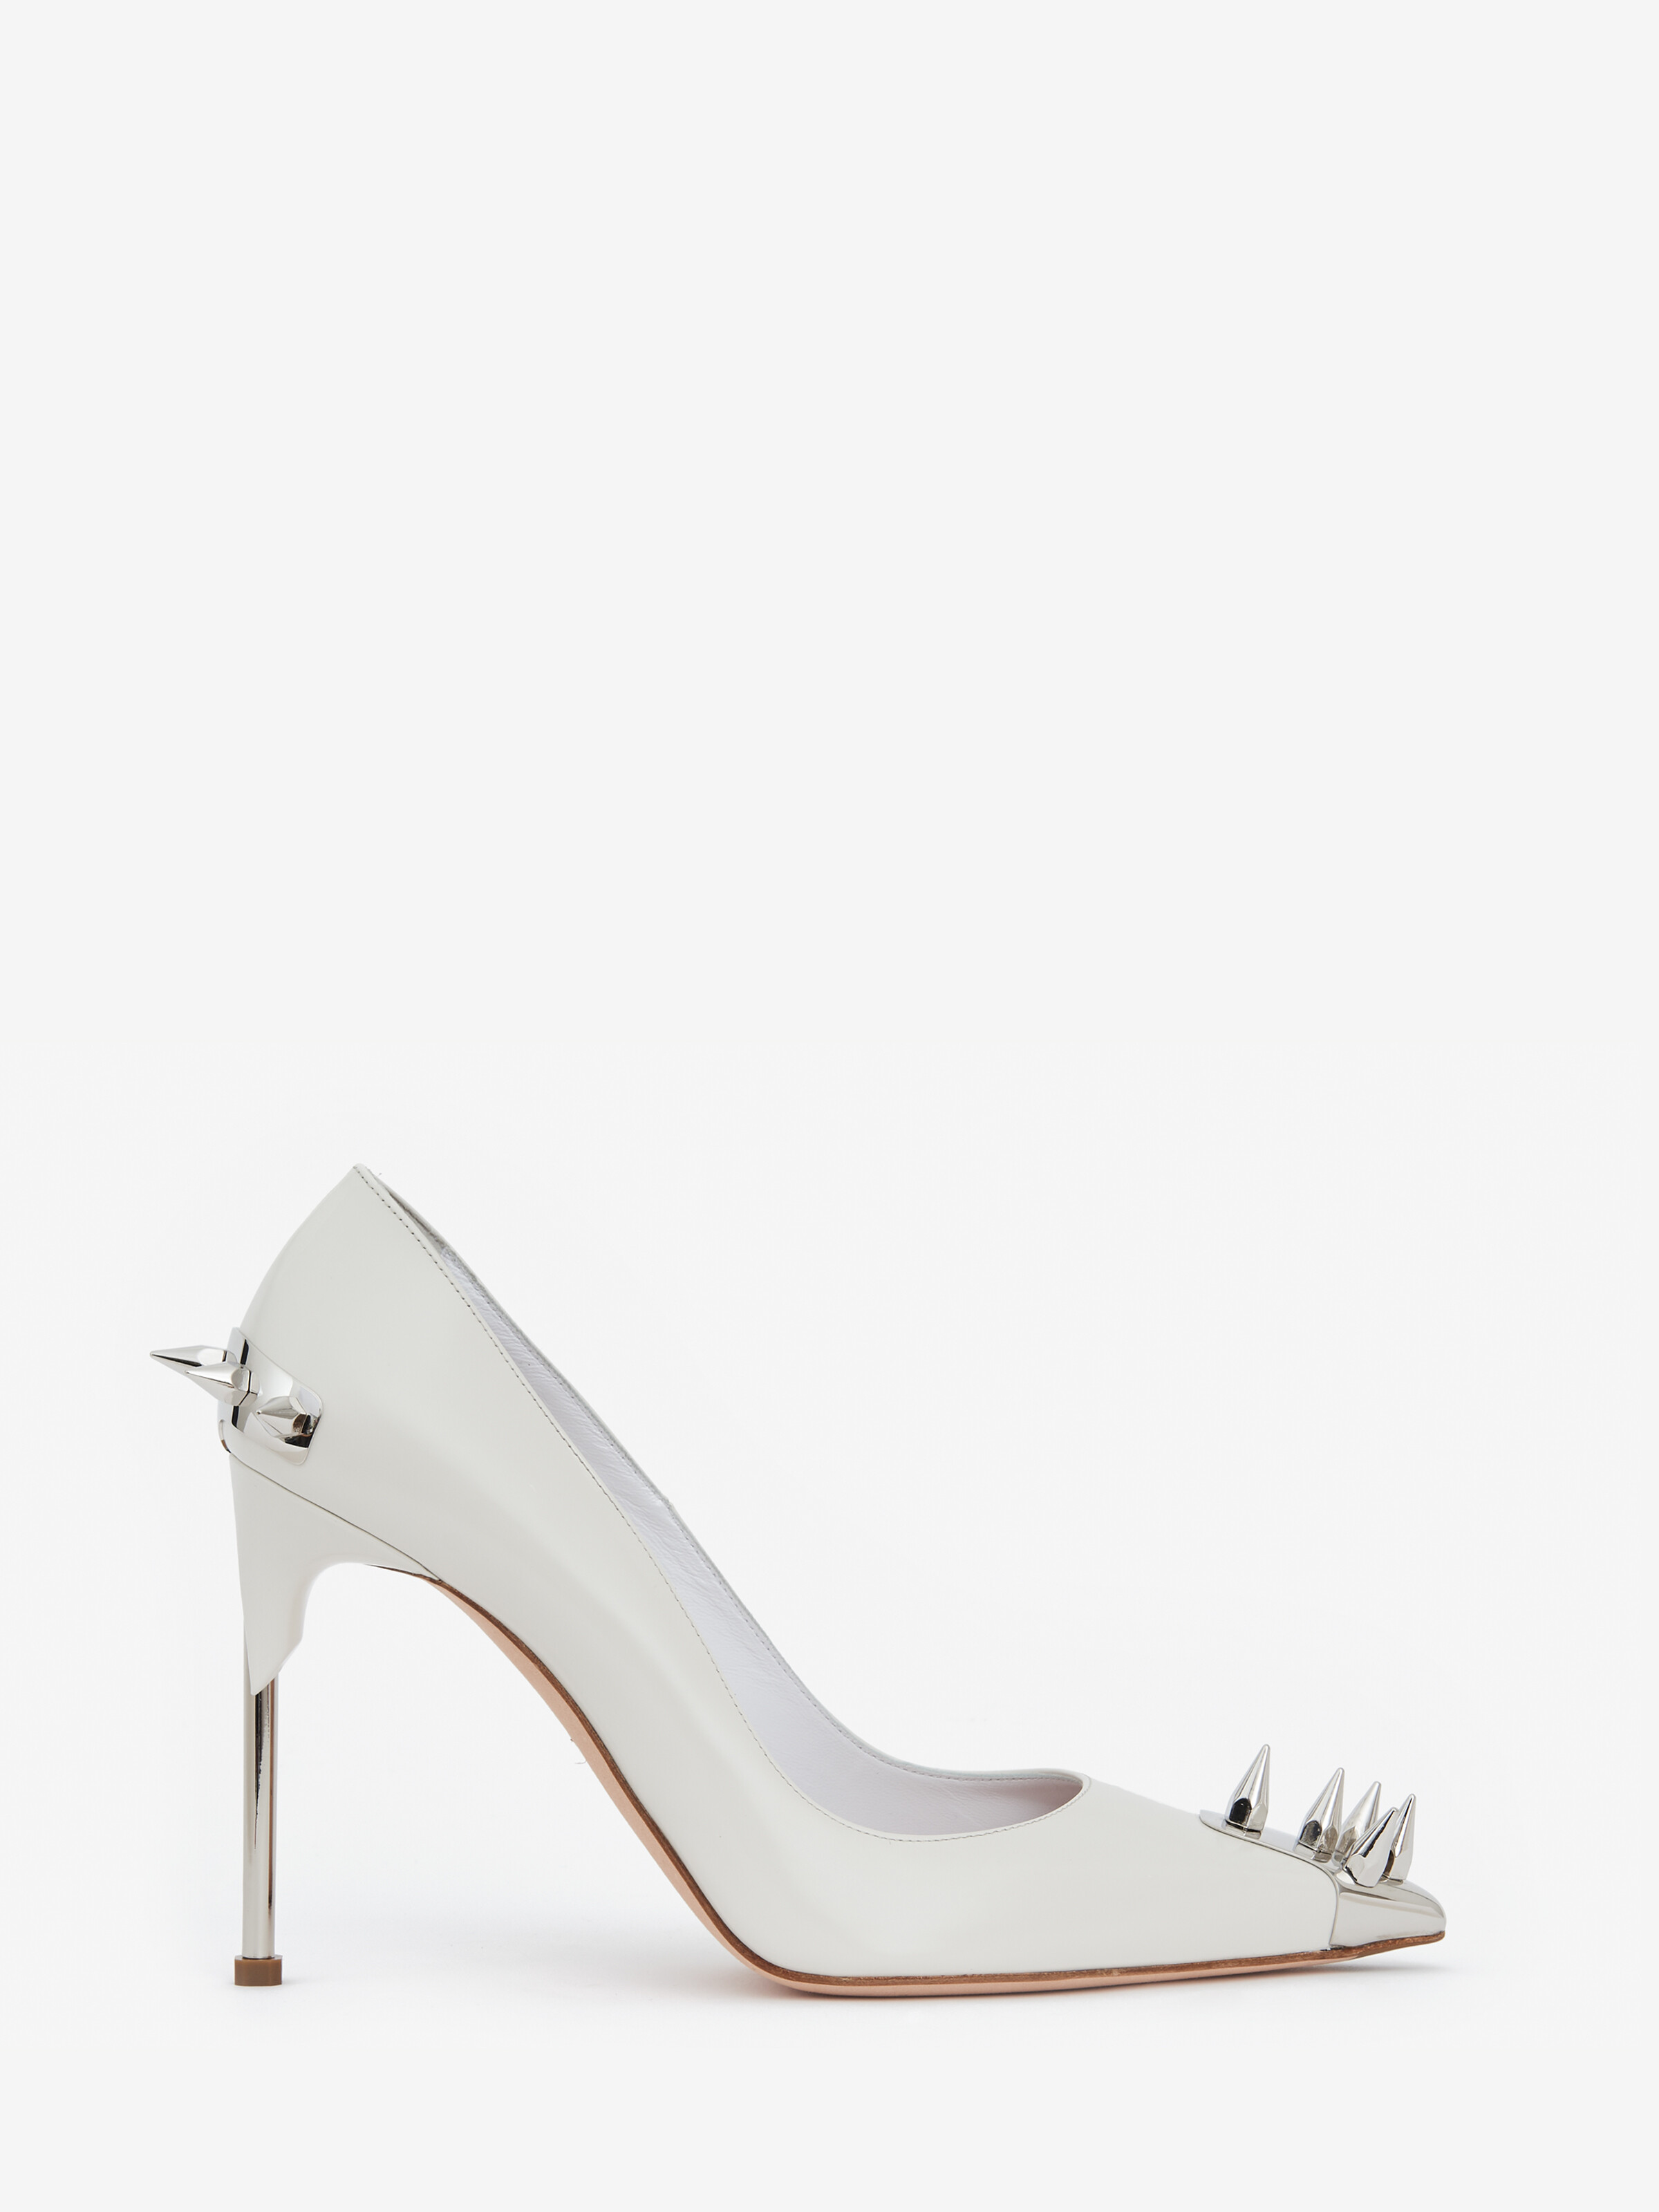 Punk Stud Pump in OPT.WHITE/SILVER 